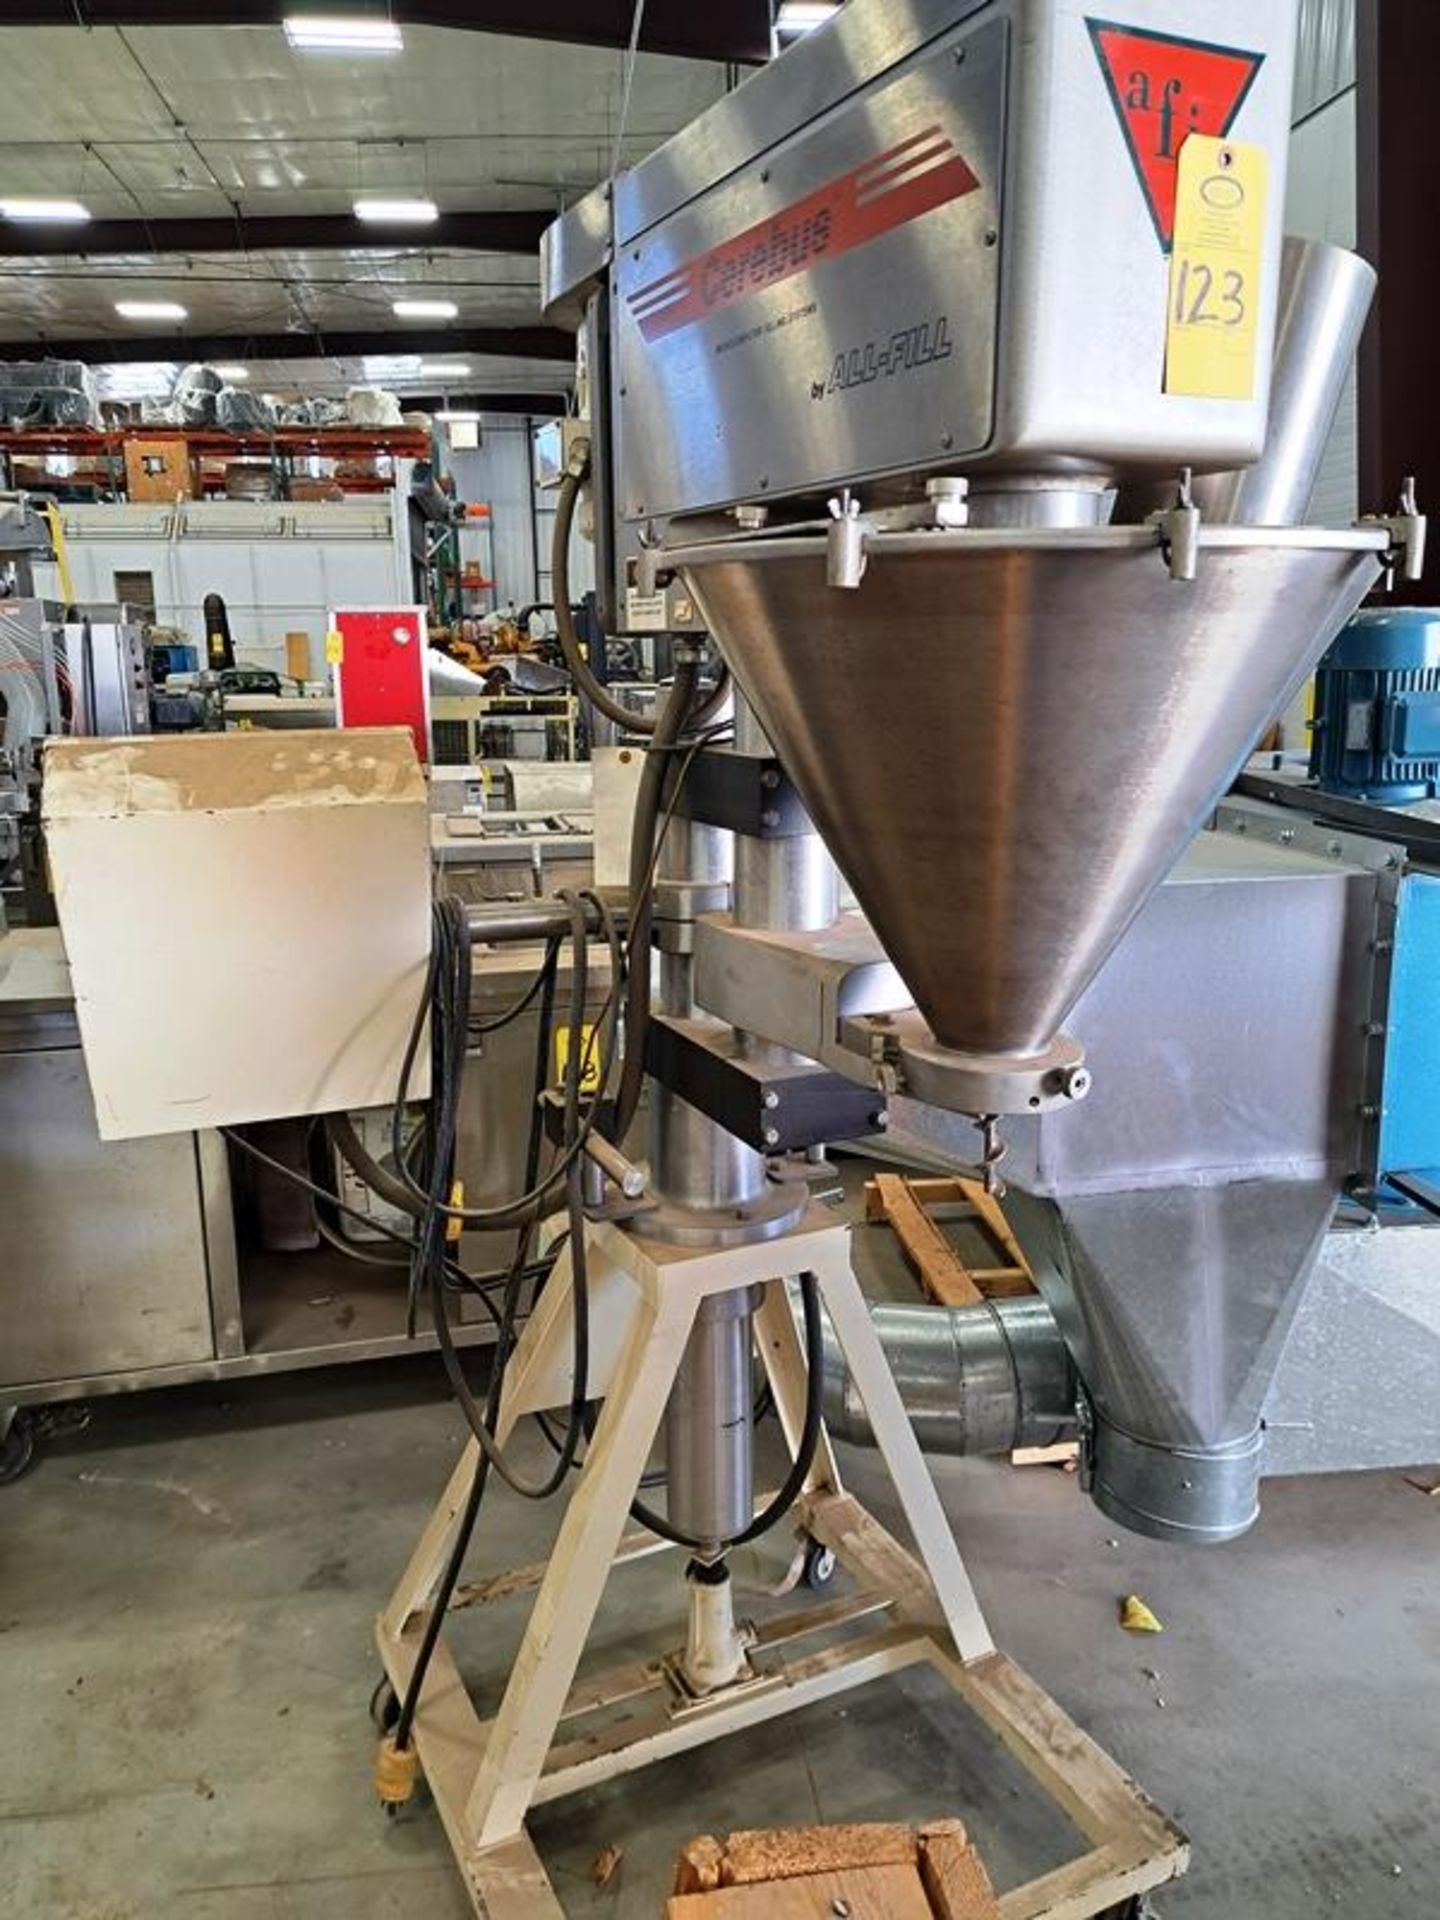 All-Fill Mdl. B300-1 Cerebus II Semi-Automatic Auger Filler, Ser. #22102, 220 volts, 3 phase,